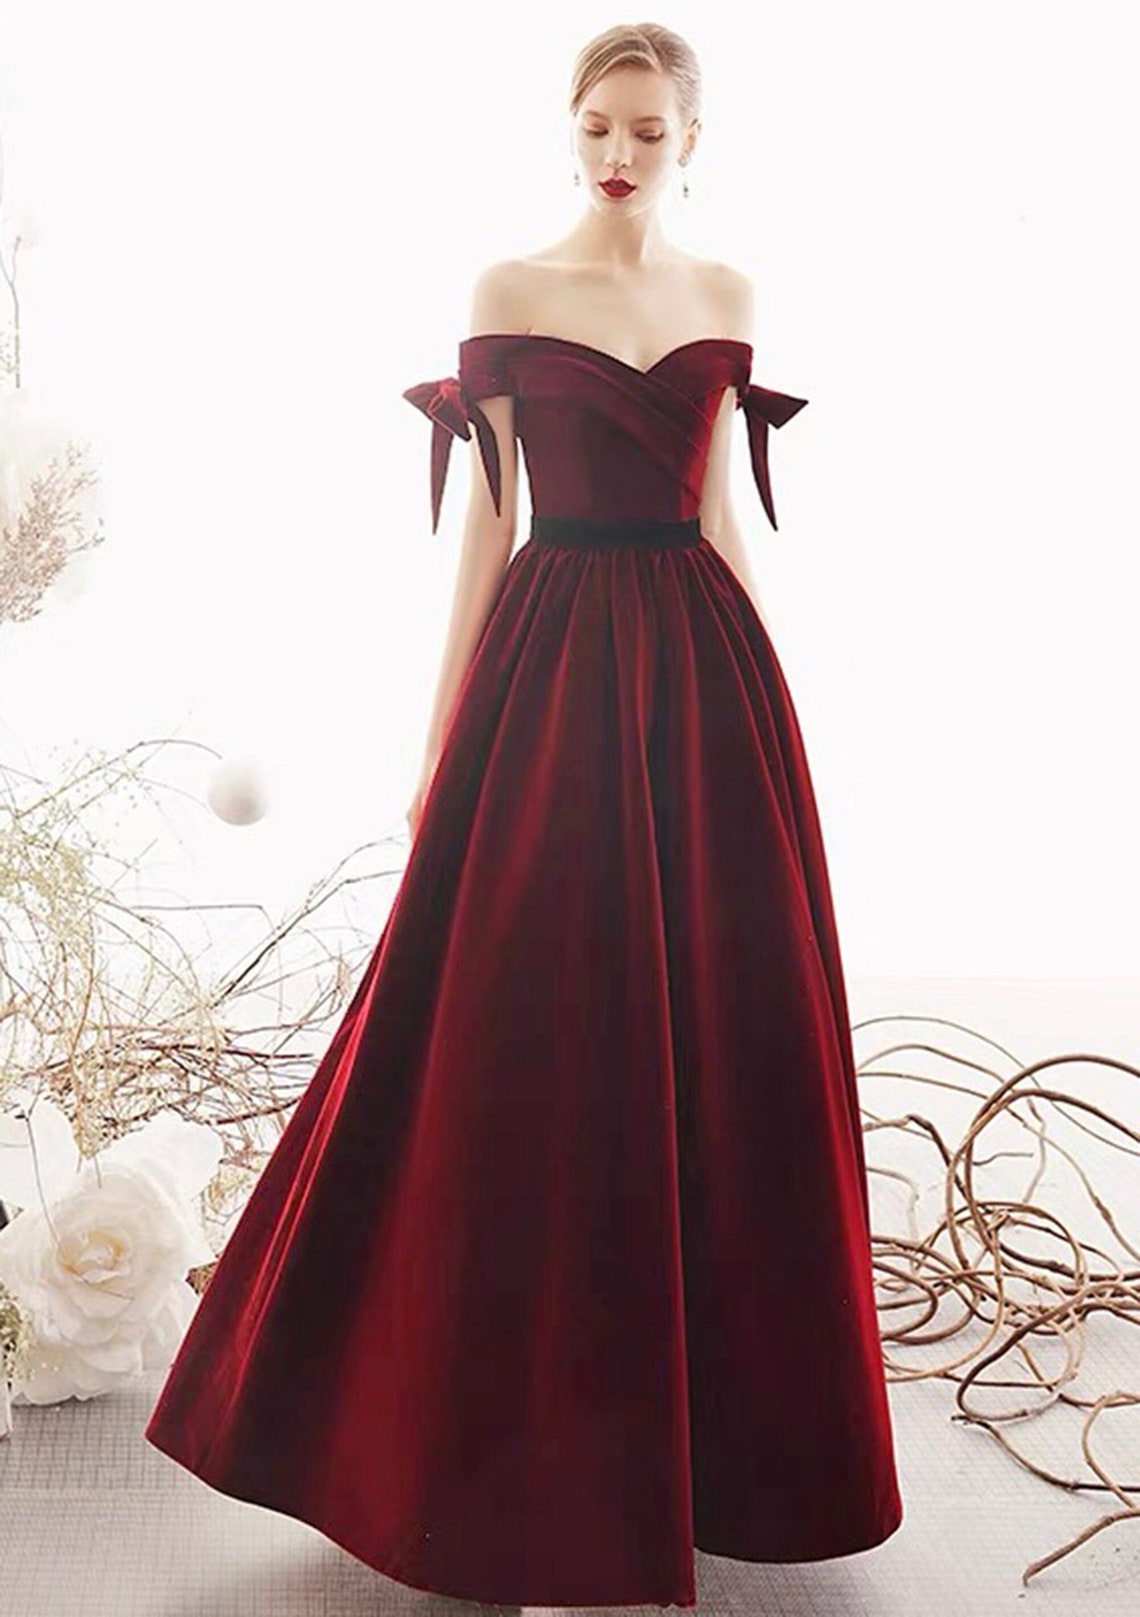 Handmade Off-the-shoulder Ball gown Velvet Dress with bows image 1